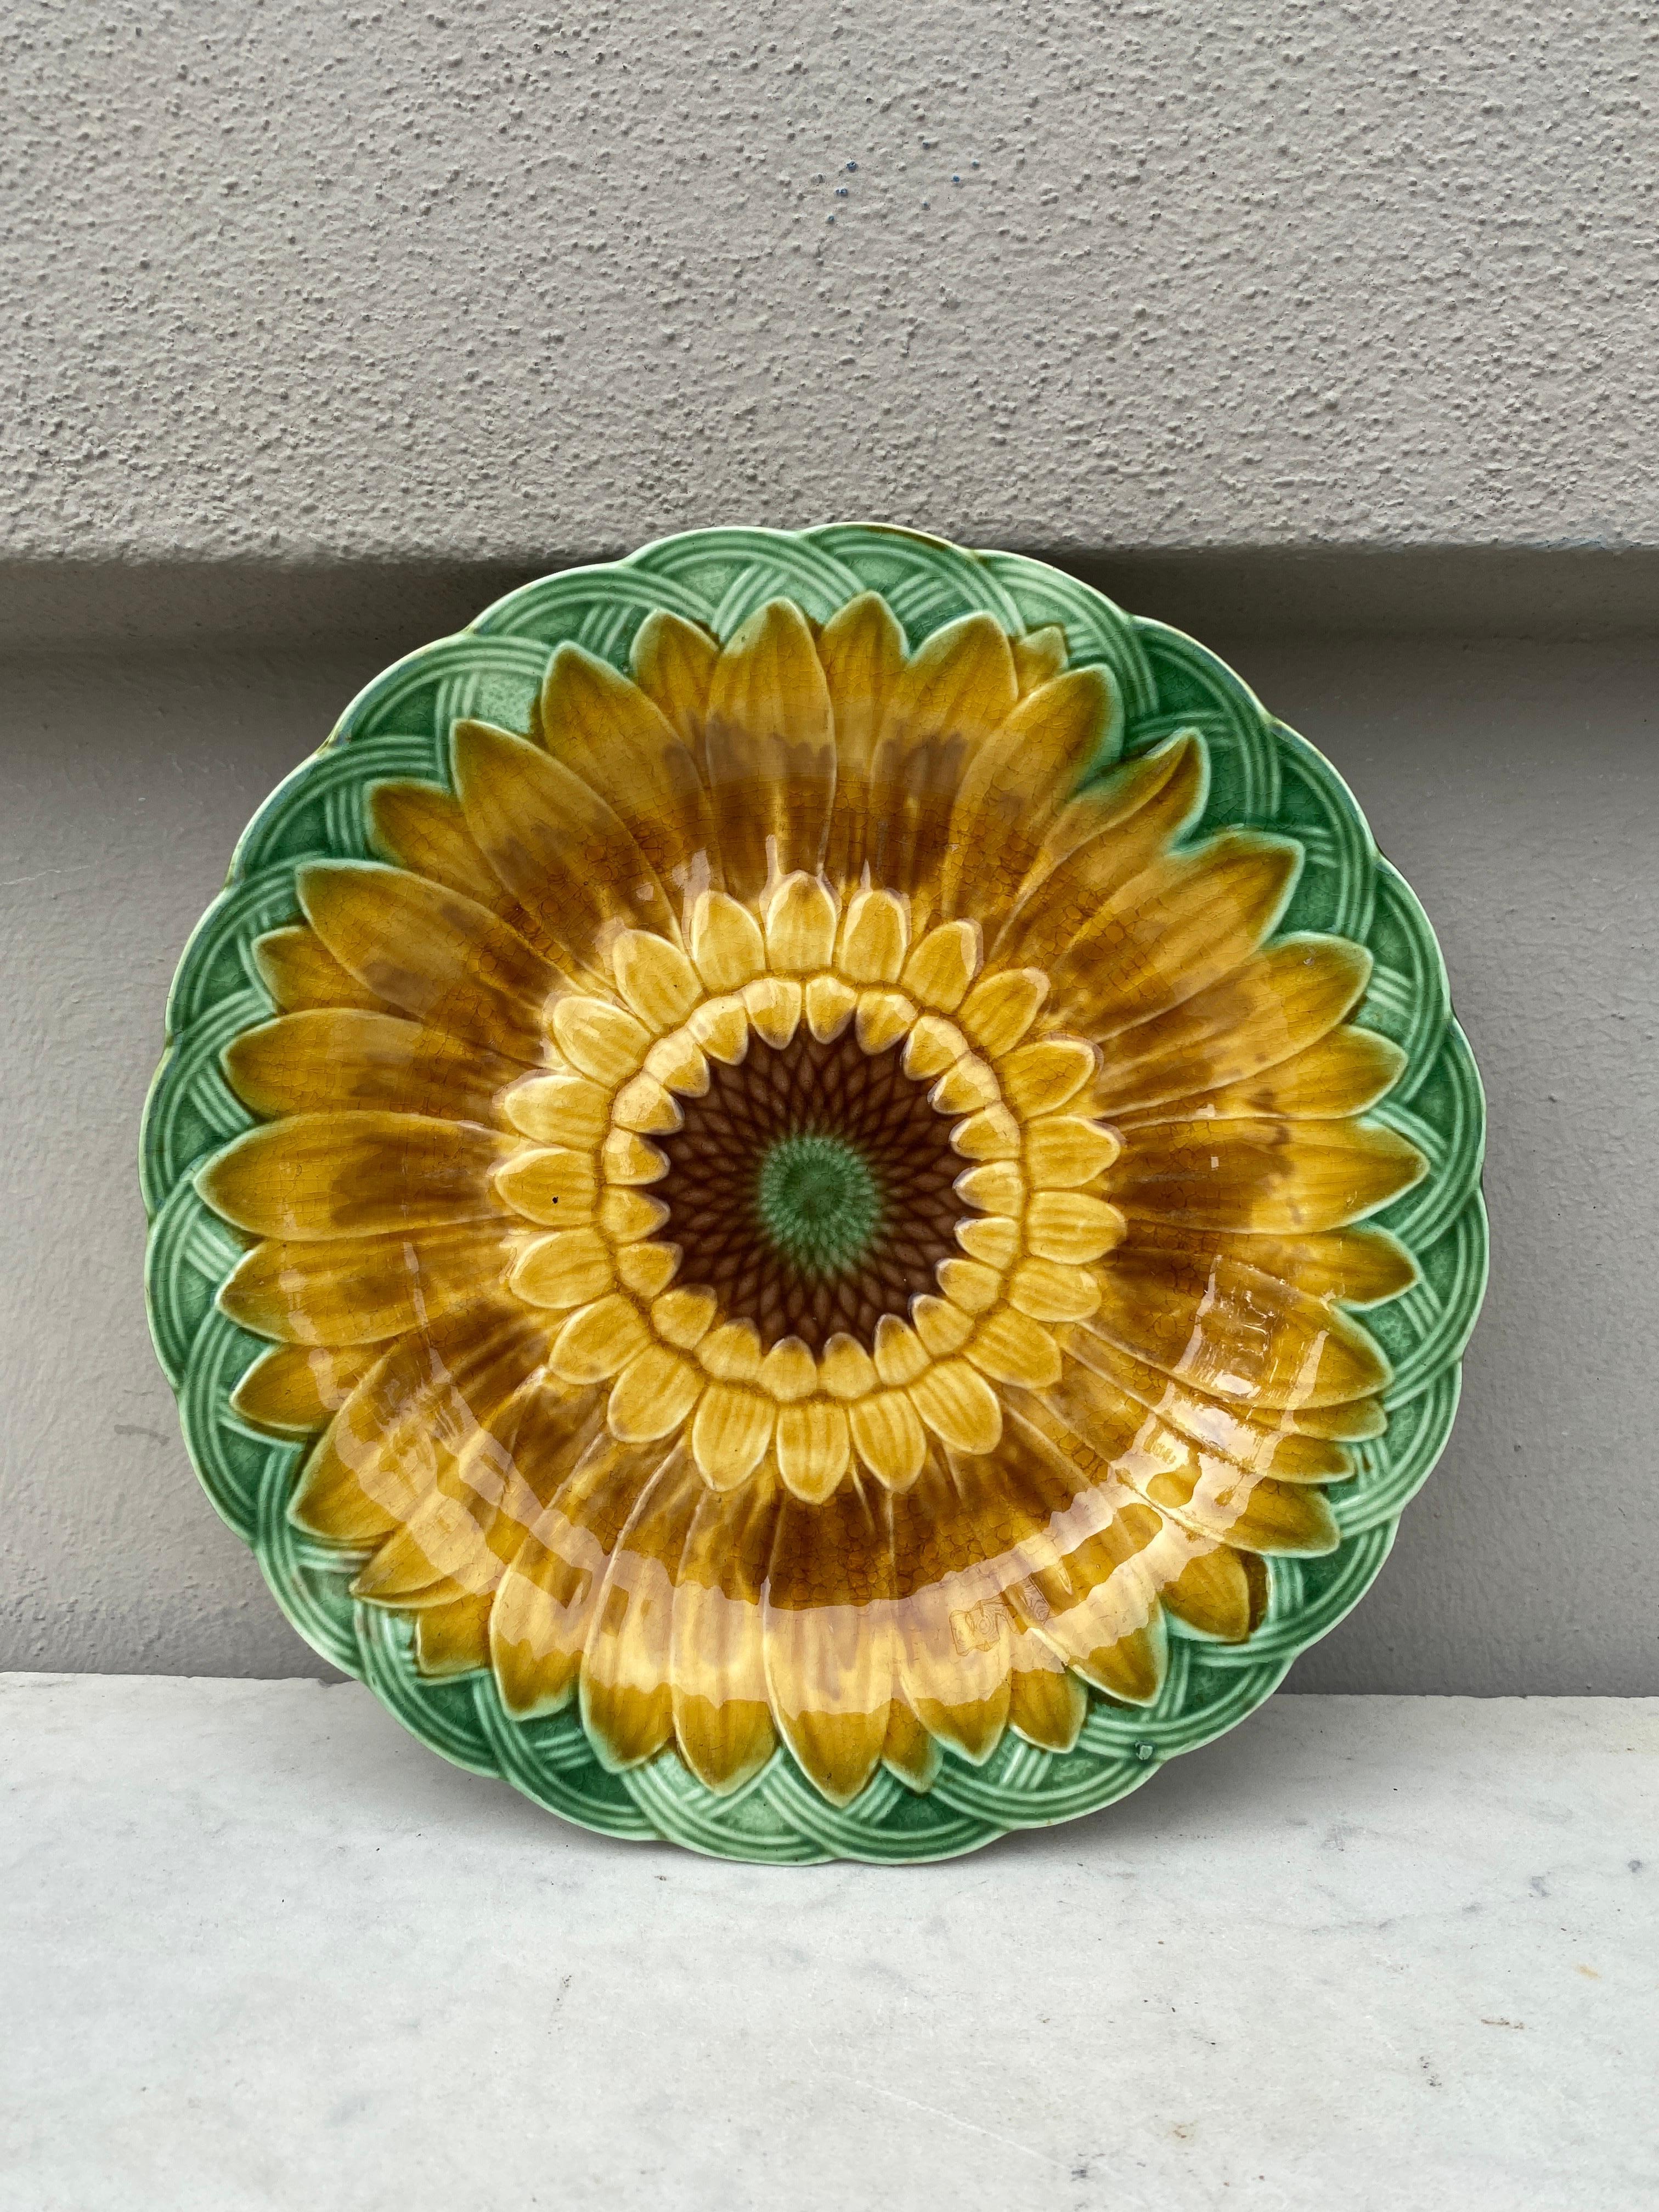 19th century Victorian Majolica sunflower plate signed Wedgwood.